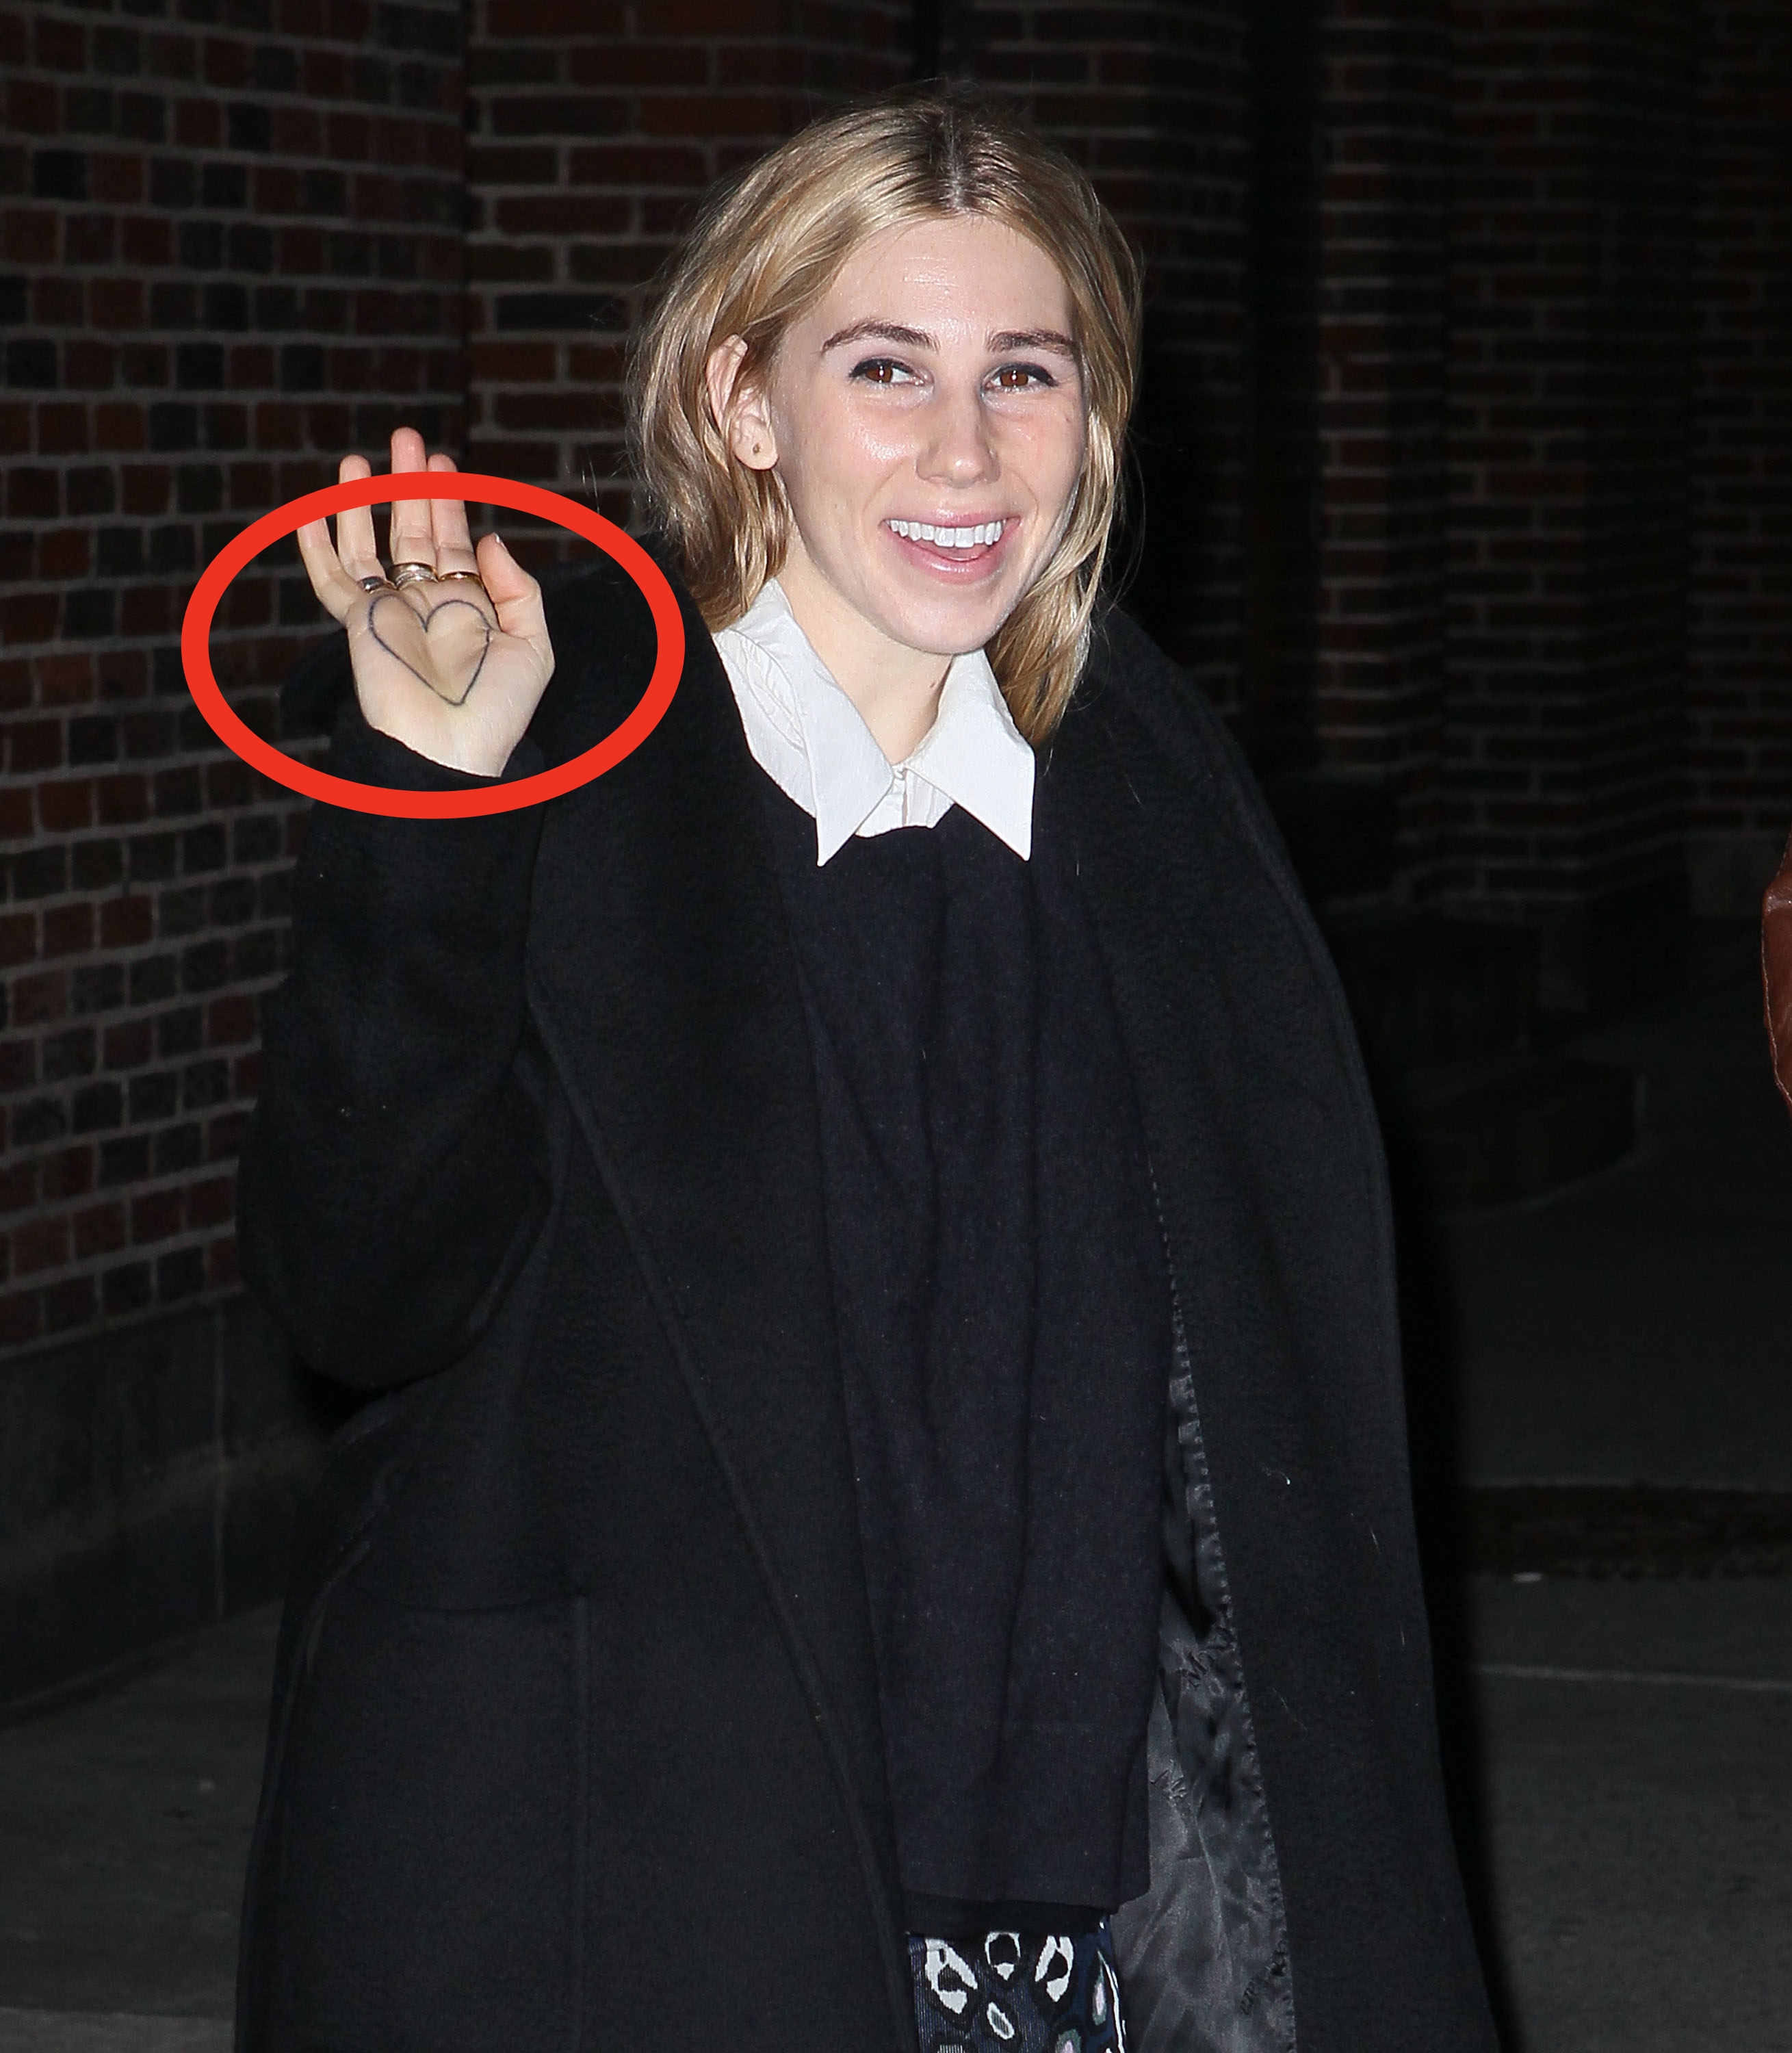 Closeup of Zosia Mamet and a circle over her hand tattoo